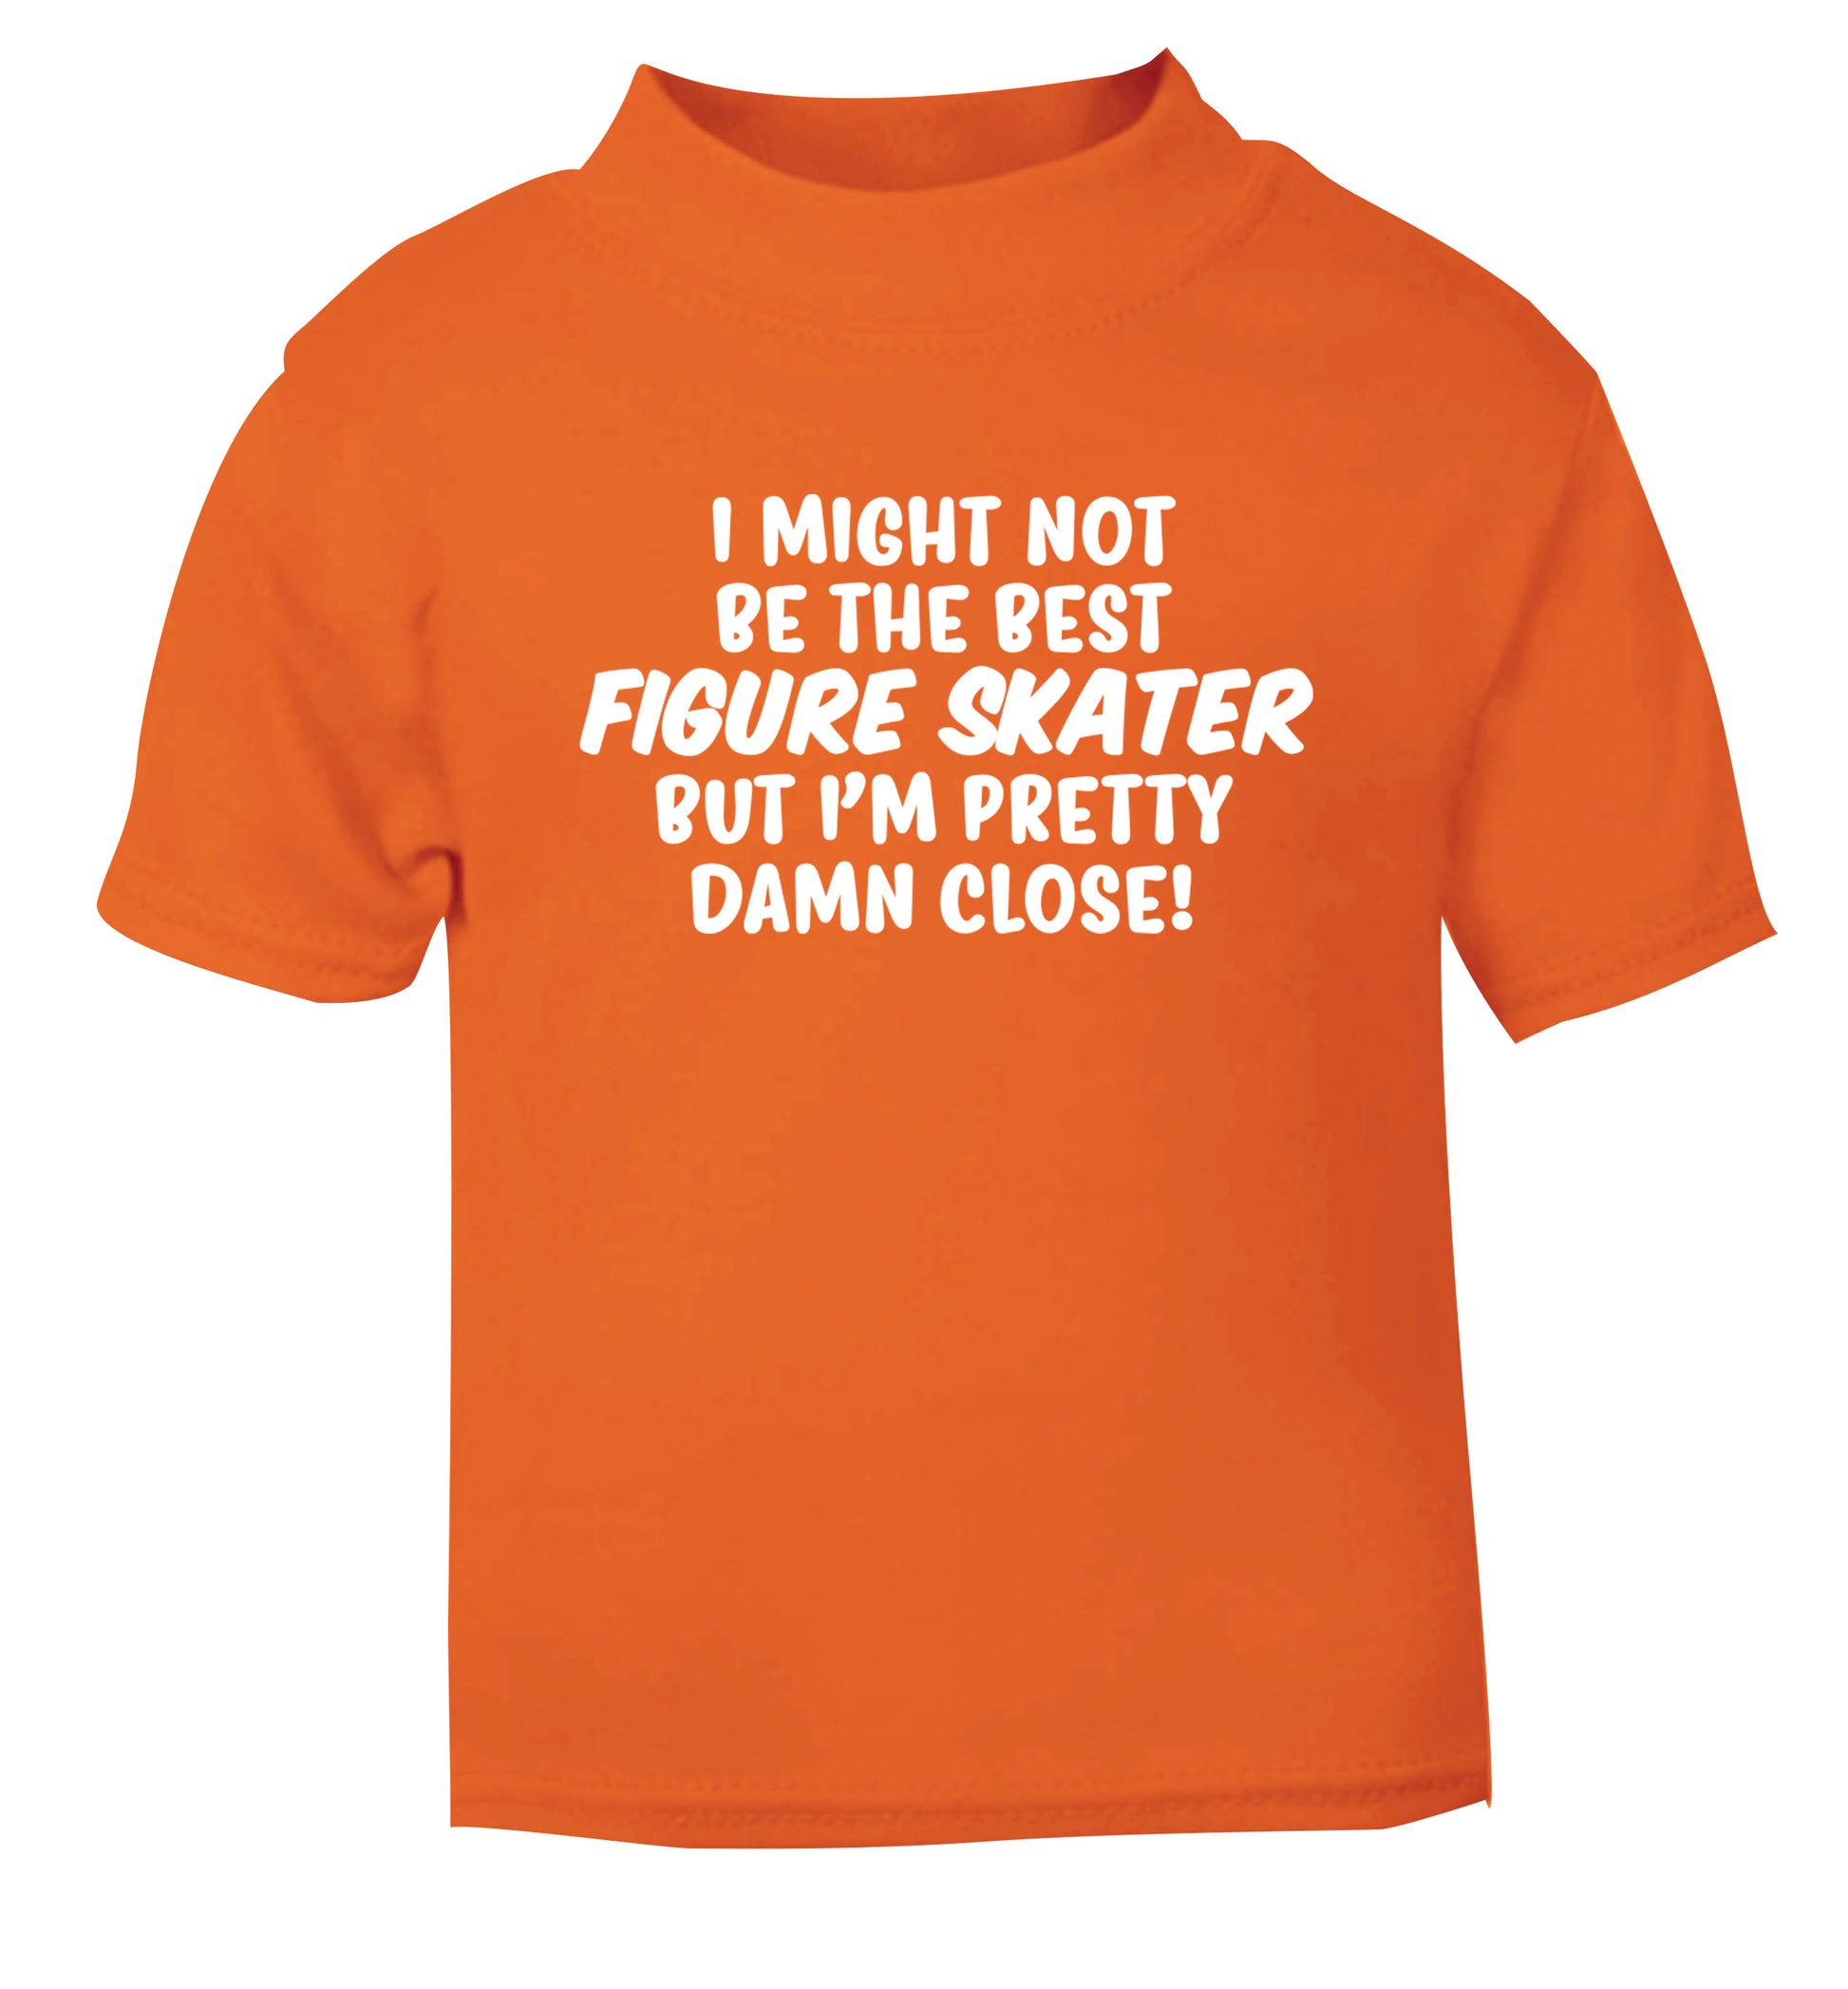 I might not be the best figure skater but I'm pretty damn close! orange Baby Toddler Tshirt 2 Years